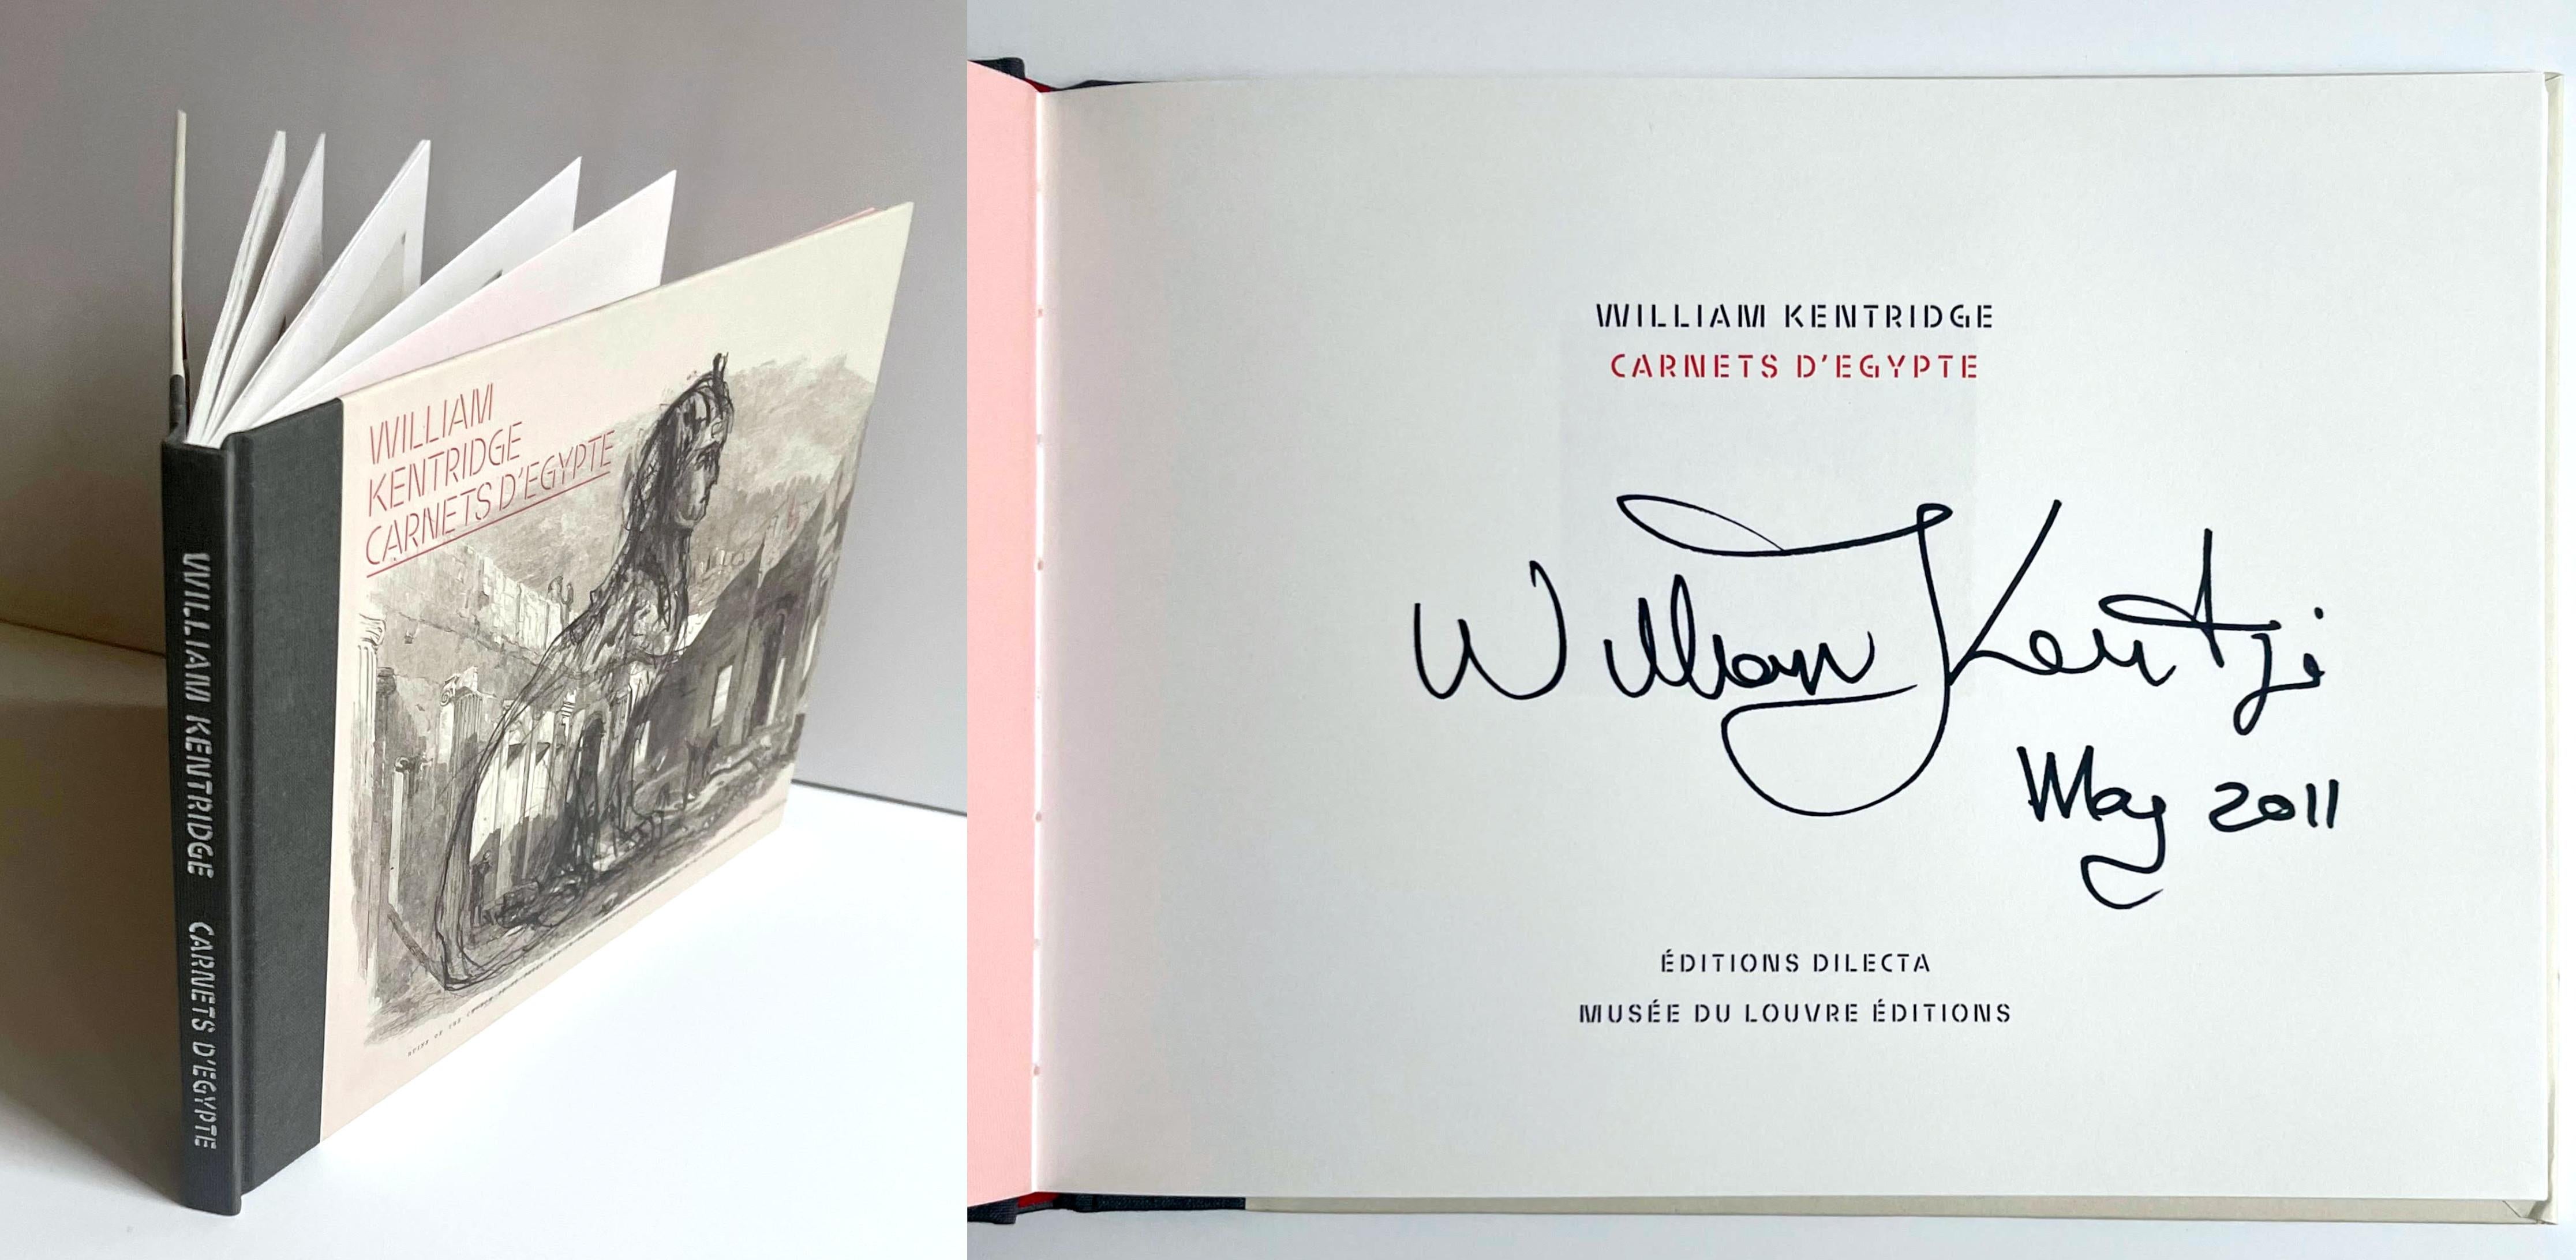 William Kentridge
Carnets D'Egypte (hand signed and dated by William Kentridge), 2011
Hardback monograph with no dust jacket as issued (hand signed by William Kentridge)
Boldly signed and dated "May 2011" on the title page by William Kentridge
7 × 9